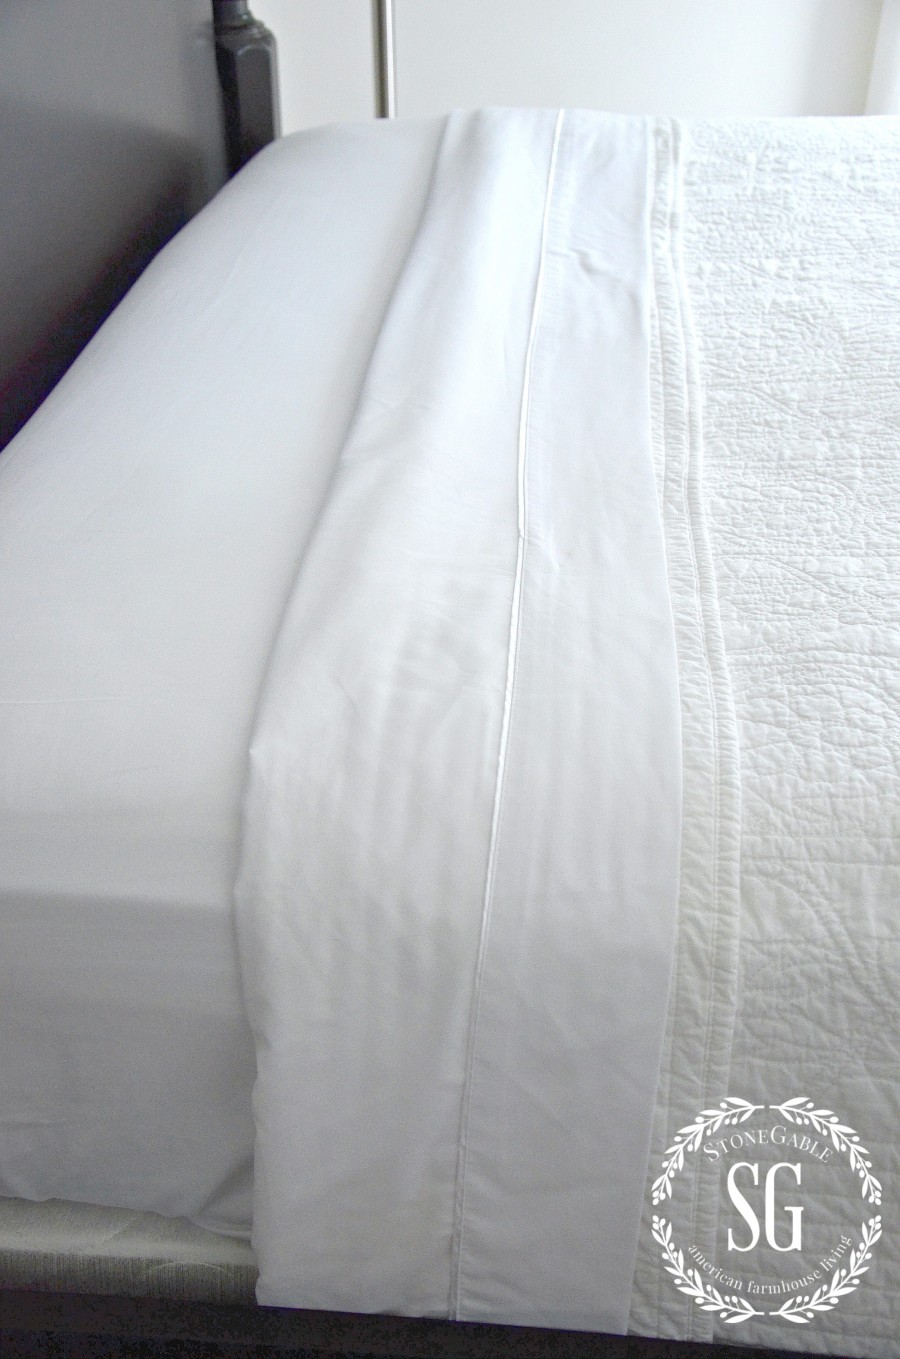 LAYERING BEDDING LIKE A DESIGNER- Easy to do tips for making a fabulously stylish bed-stonegableblog.com